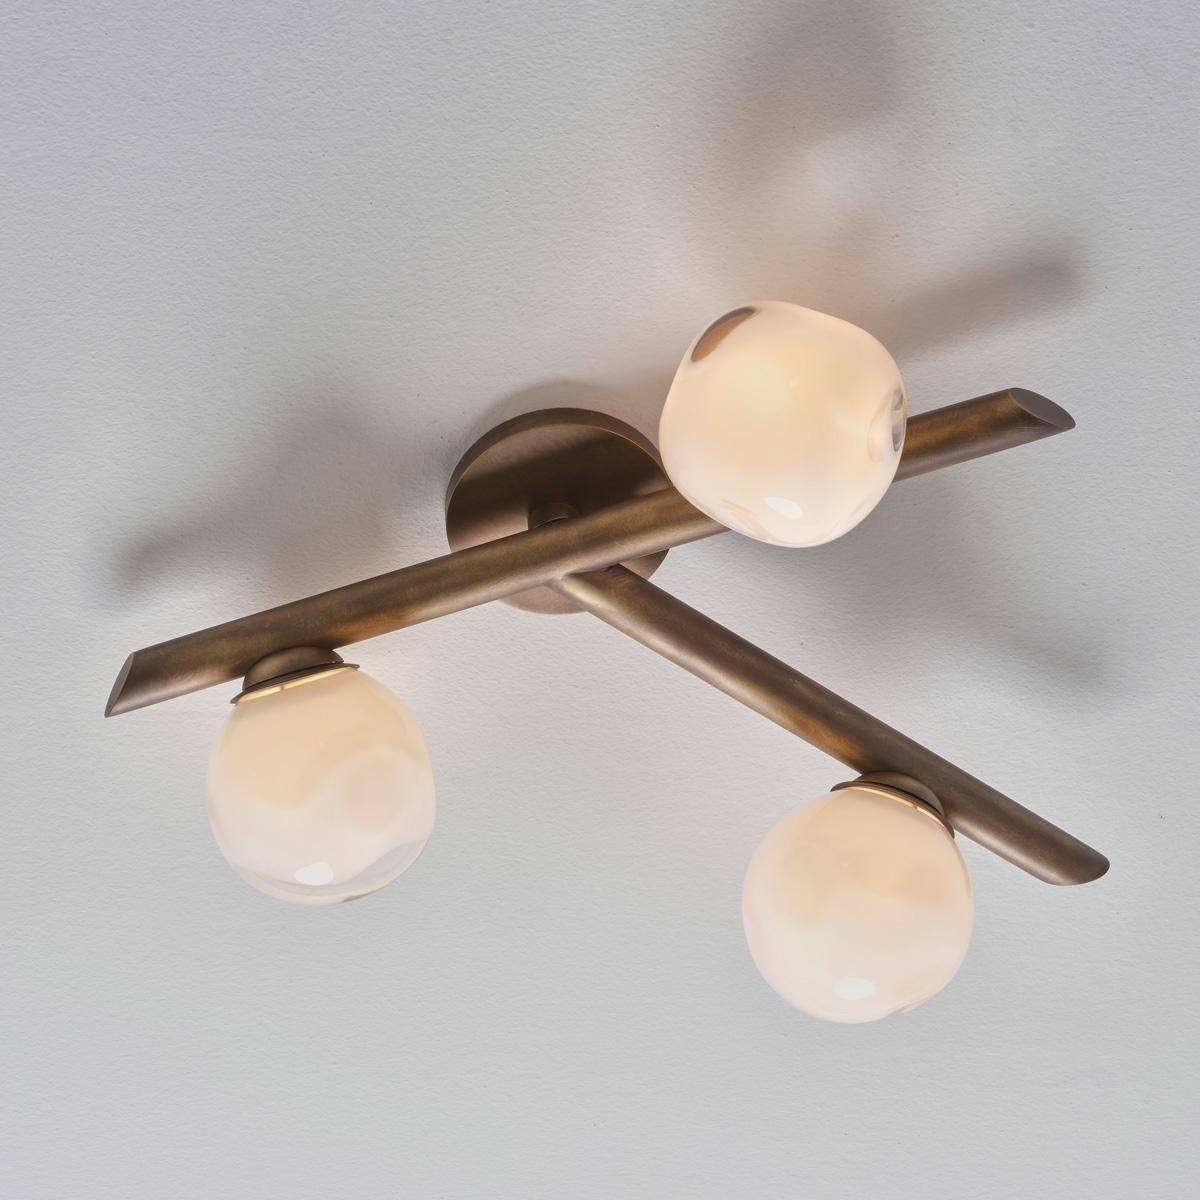 Italian Antares Wall Light by Gaspare Asaro- Satin Brass Finish For Sale